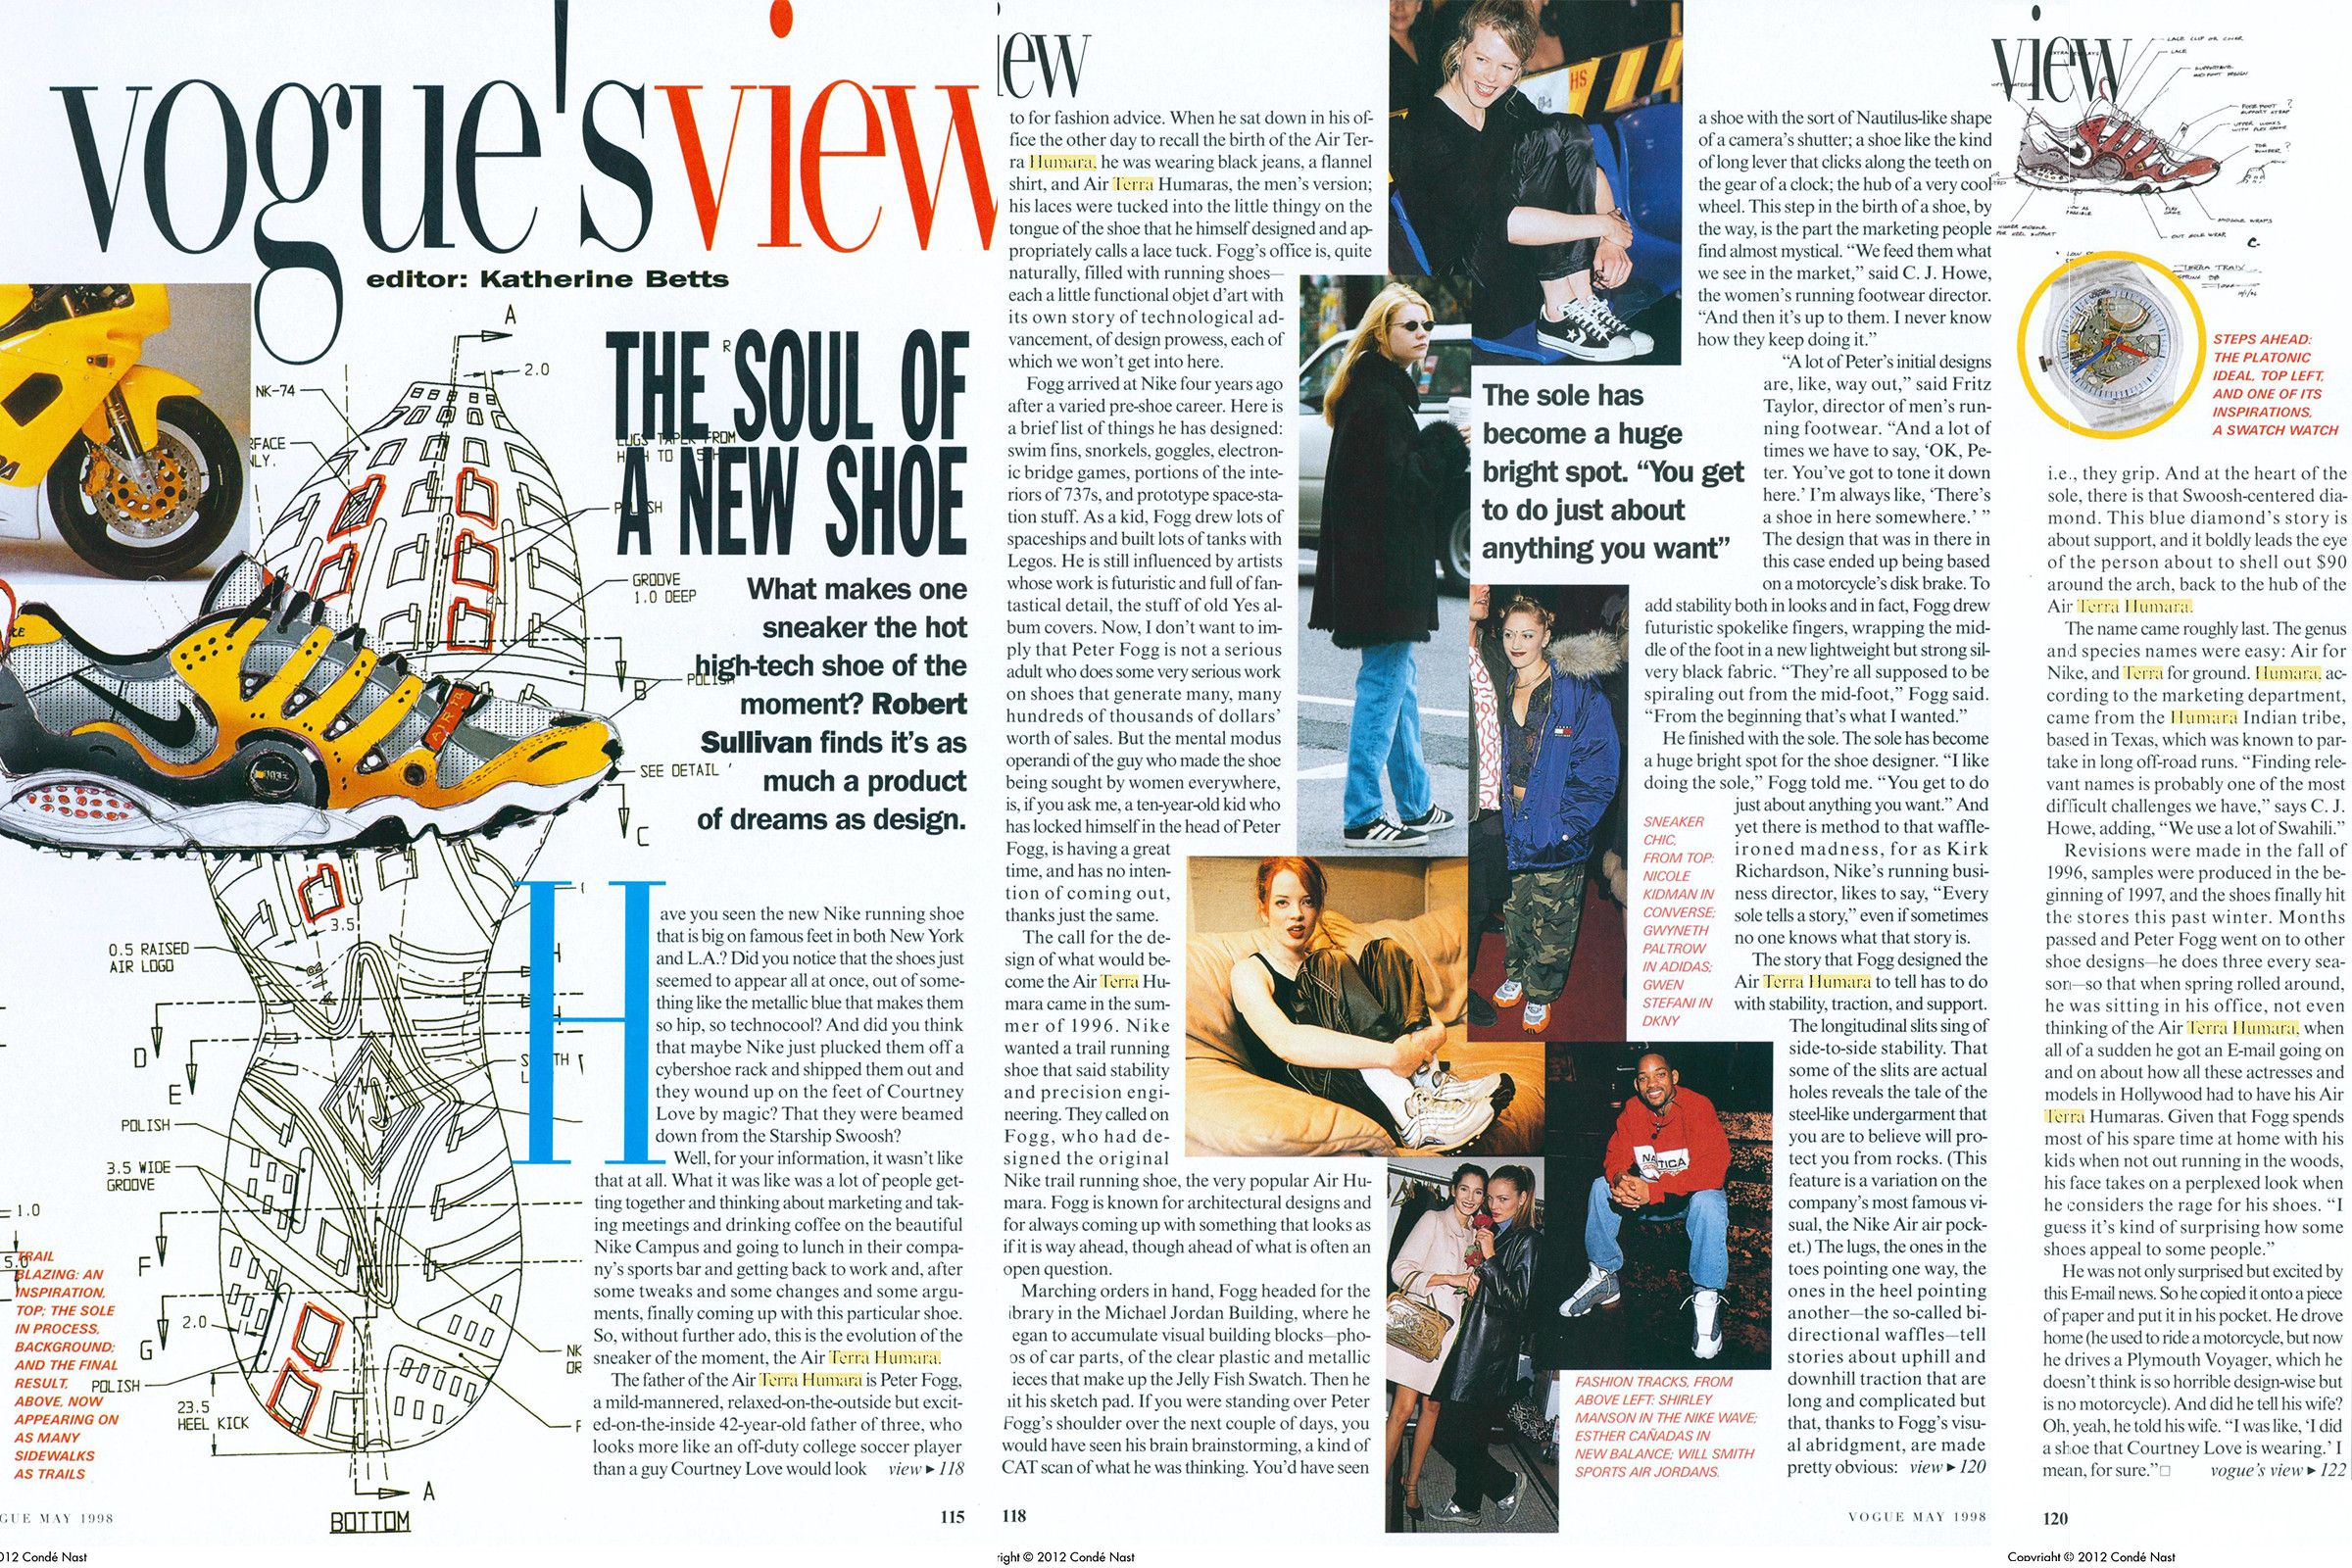 "Vogue's View" editorial on the Nike Air Humara, the Nike Air Terra Humara and Peter Fogg in the May 1998 issue of "Vogue"